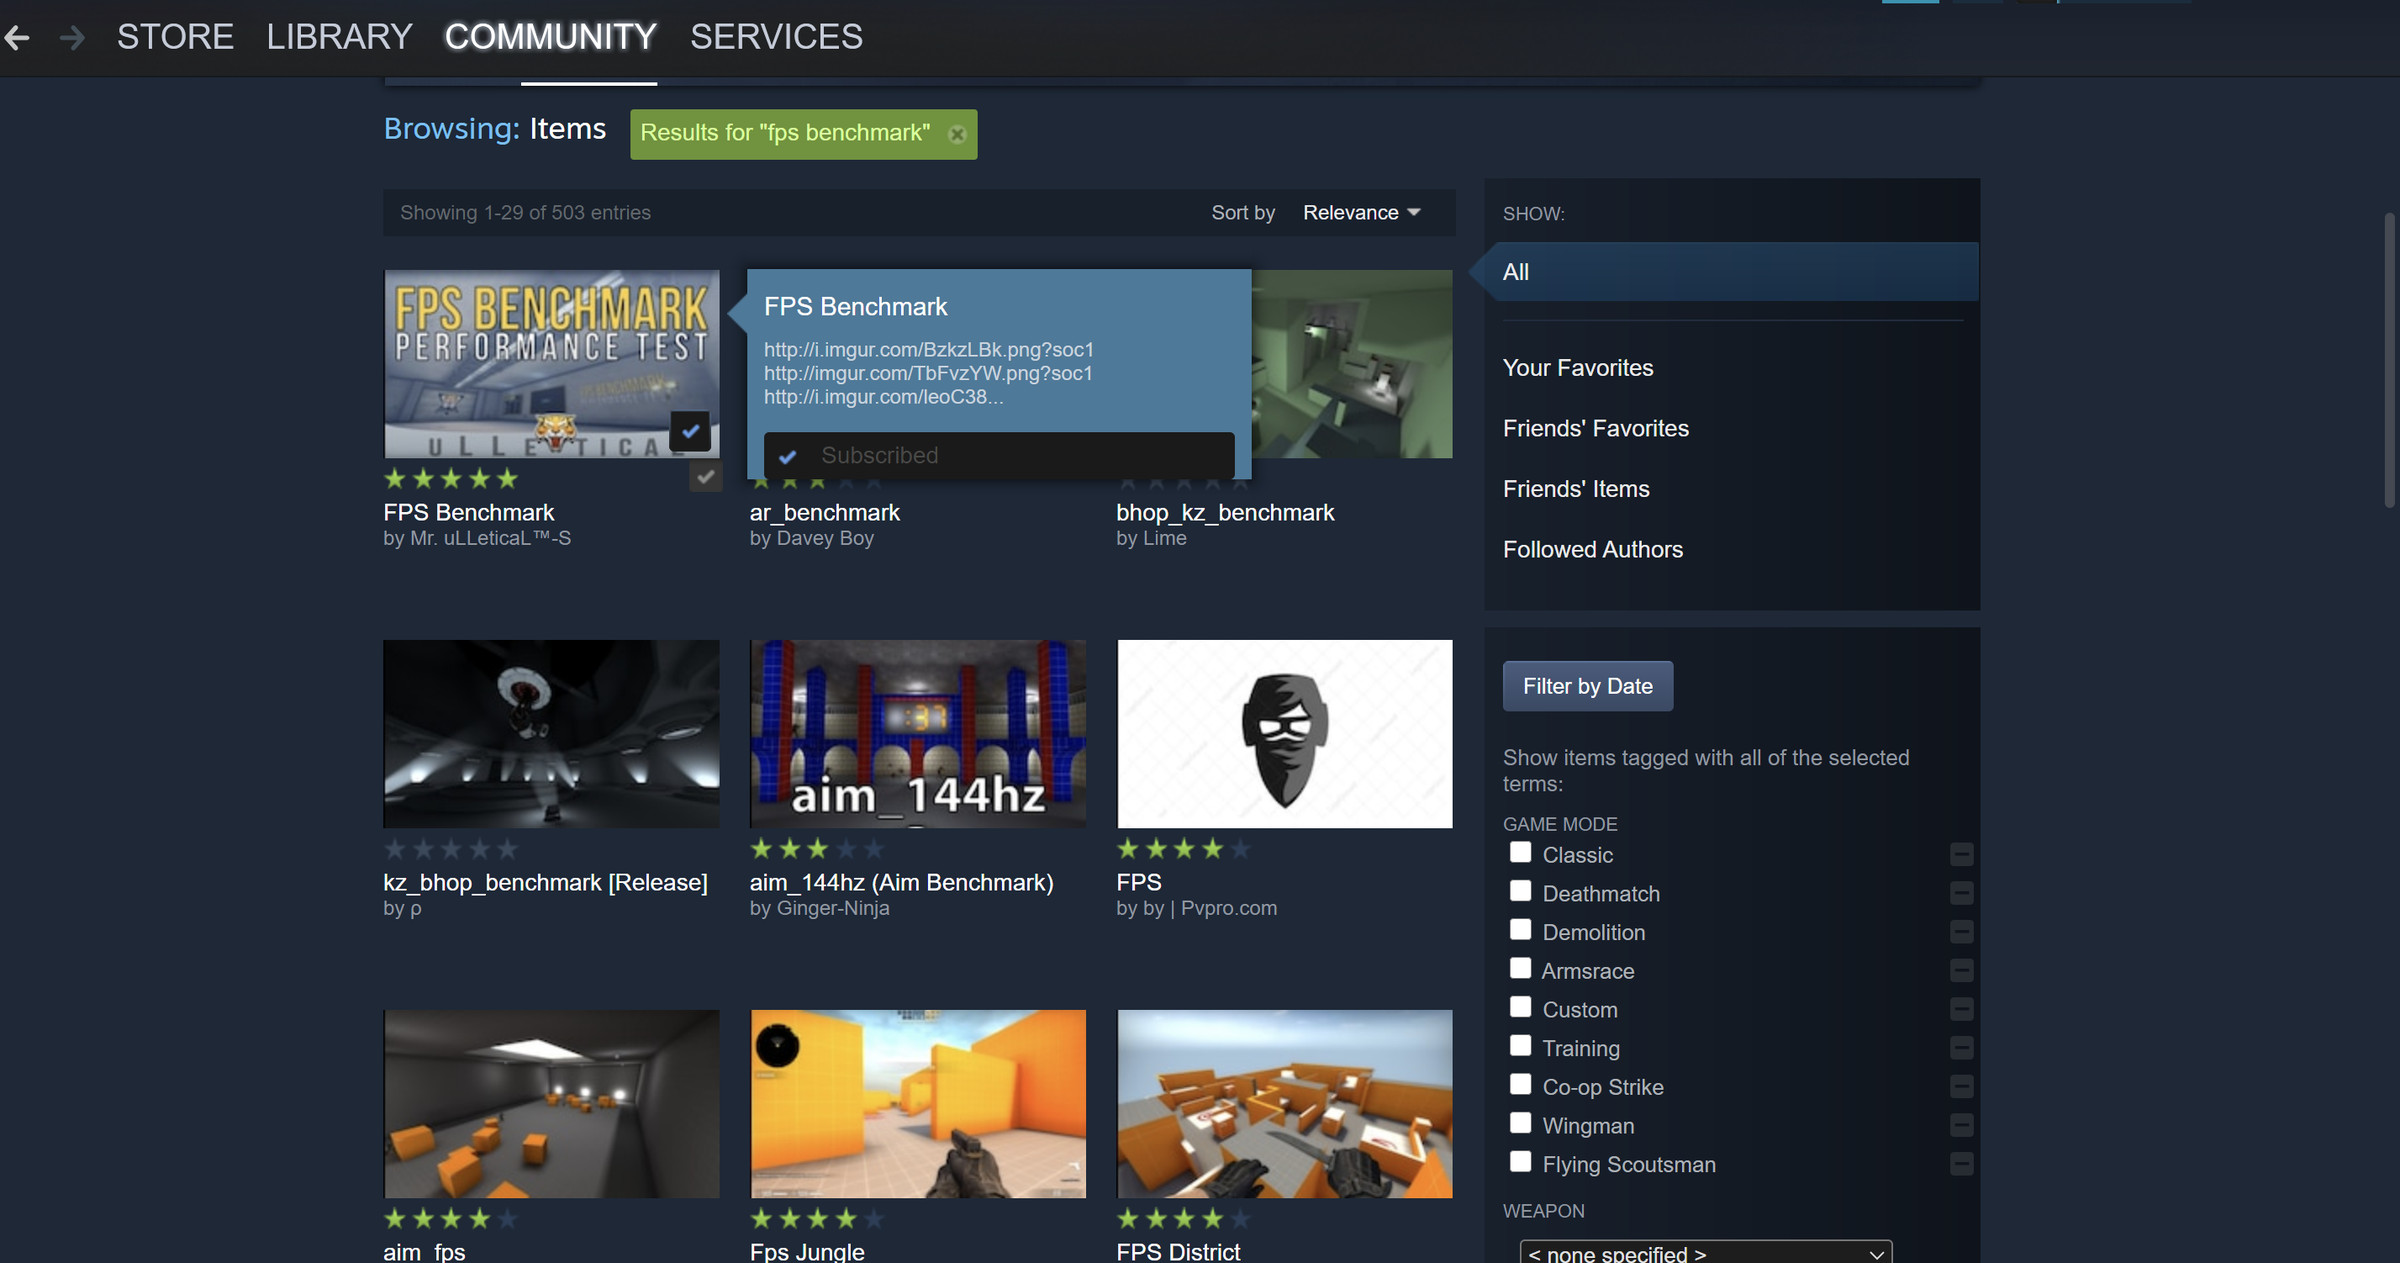 A screenshot of the Steam Workshop interface for CS:GO with the FPS Benchmark option highlighted.